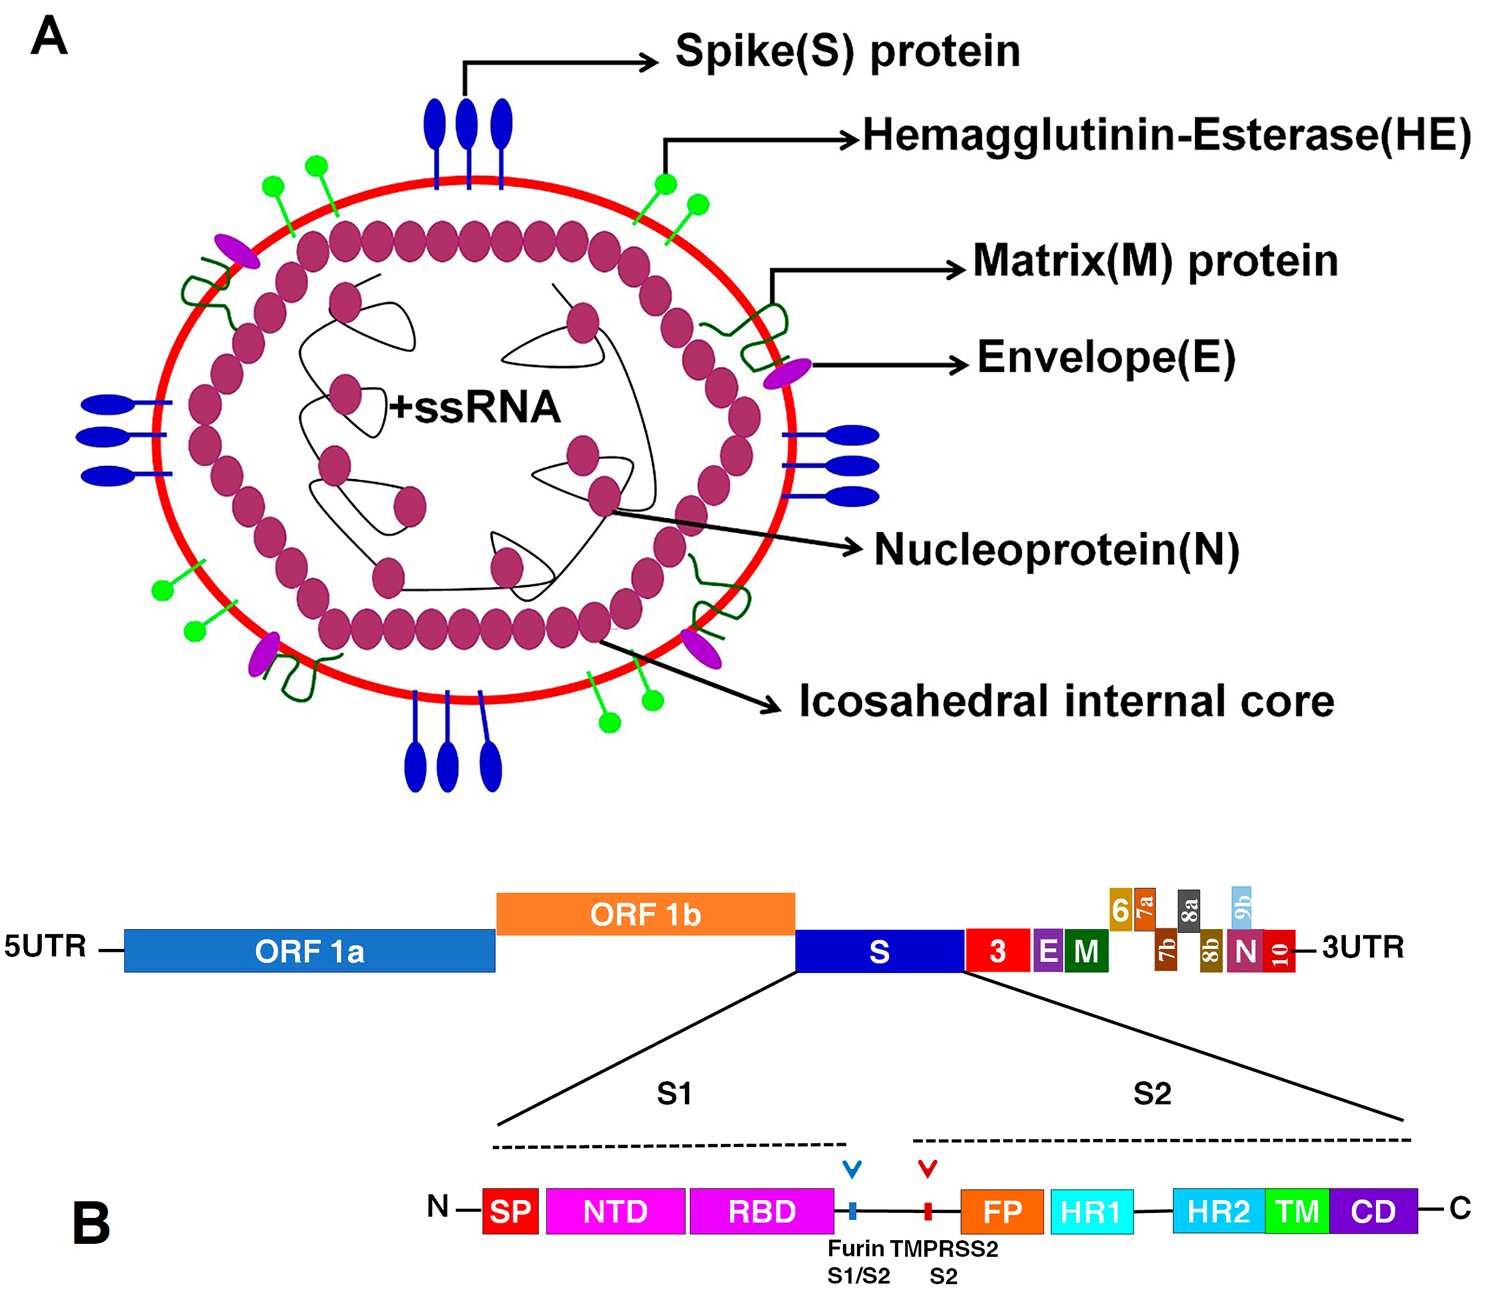 SARS-CoV-2 outbreak: role of viral proteins and genomic diversity in virus infection and COVID-19 progression